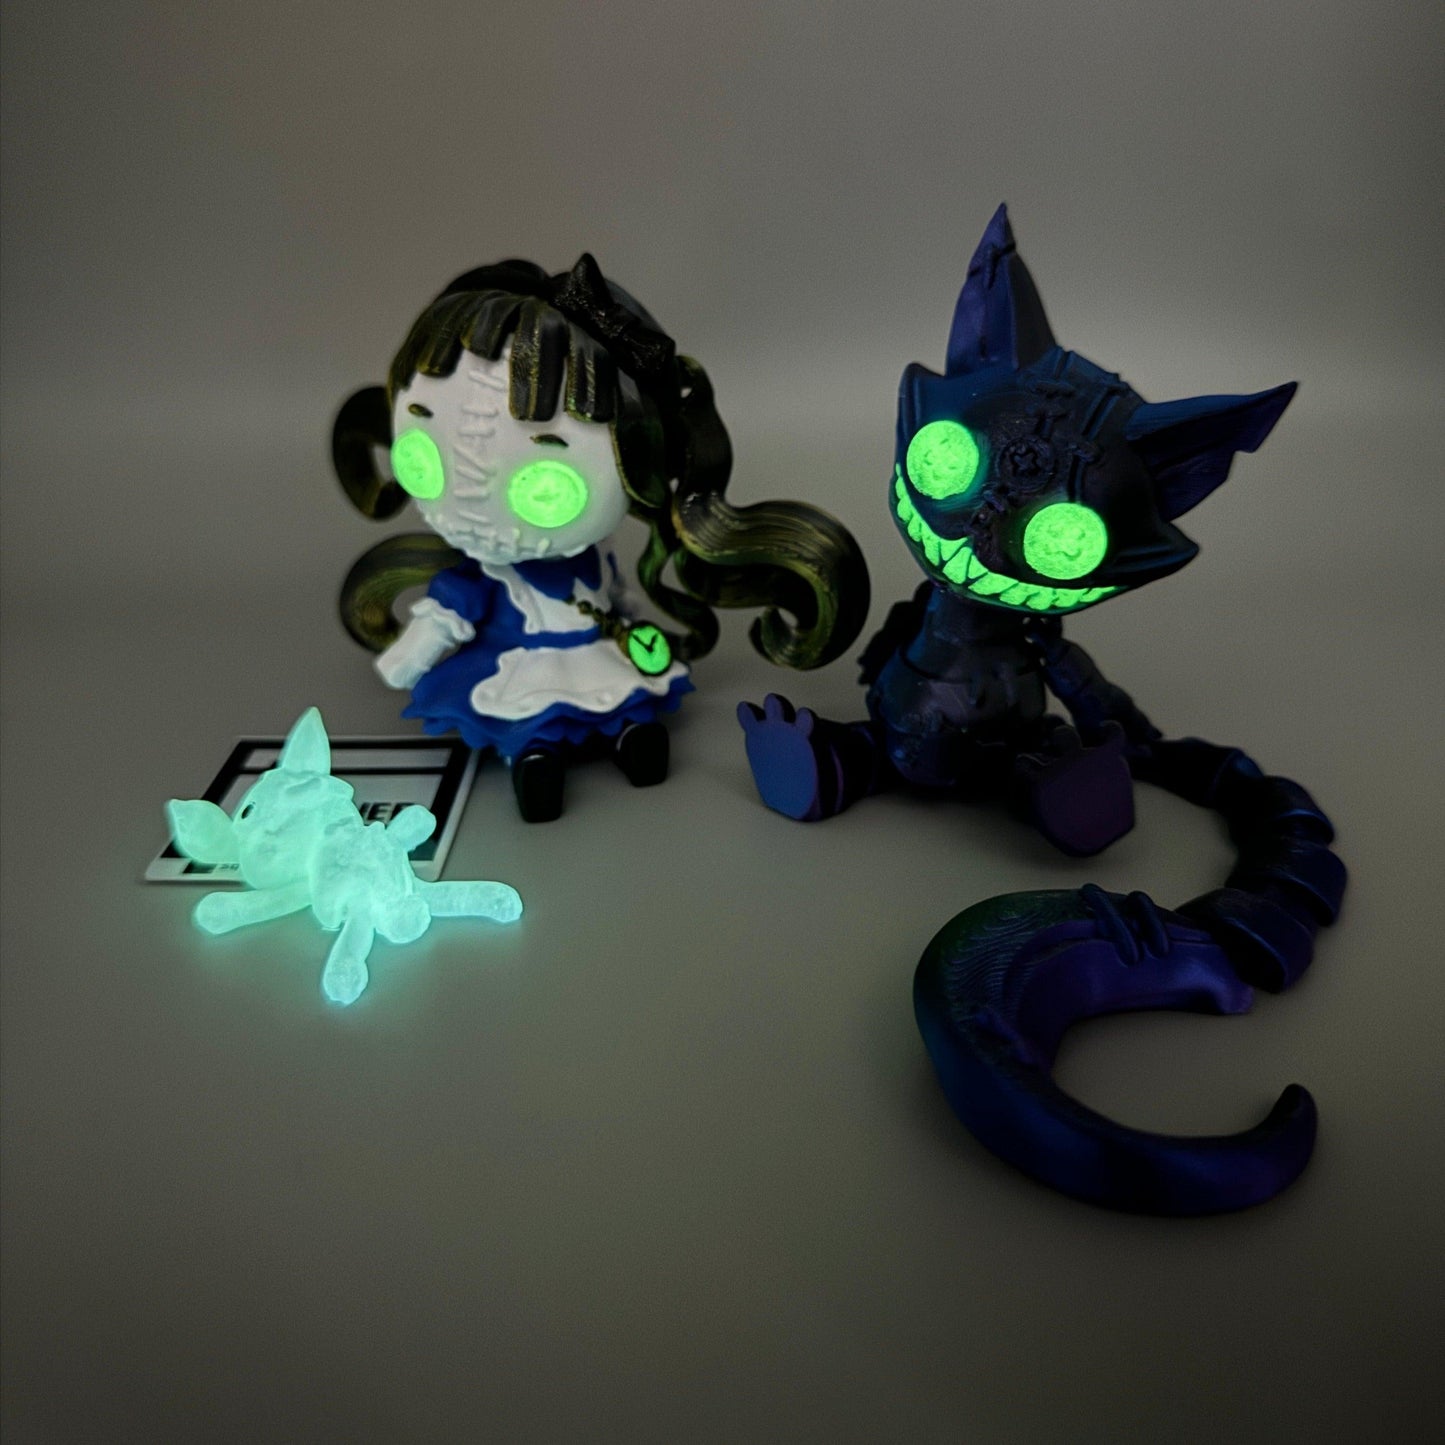 Alice in Wonderland with Rabbit | Creepy Doll | Glow in the Dark - Squee Prints